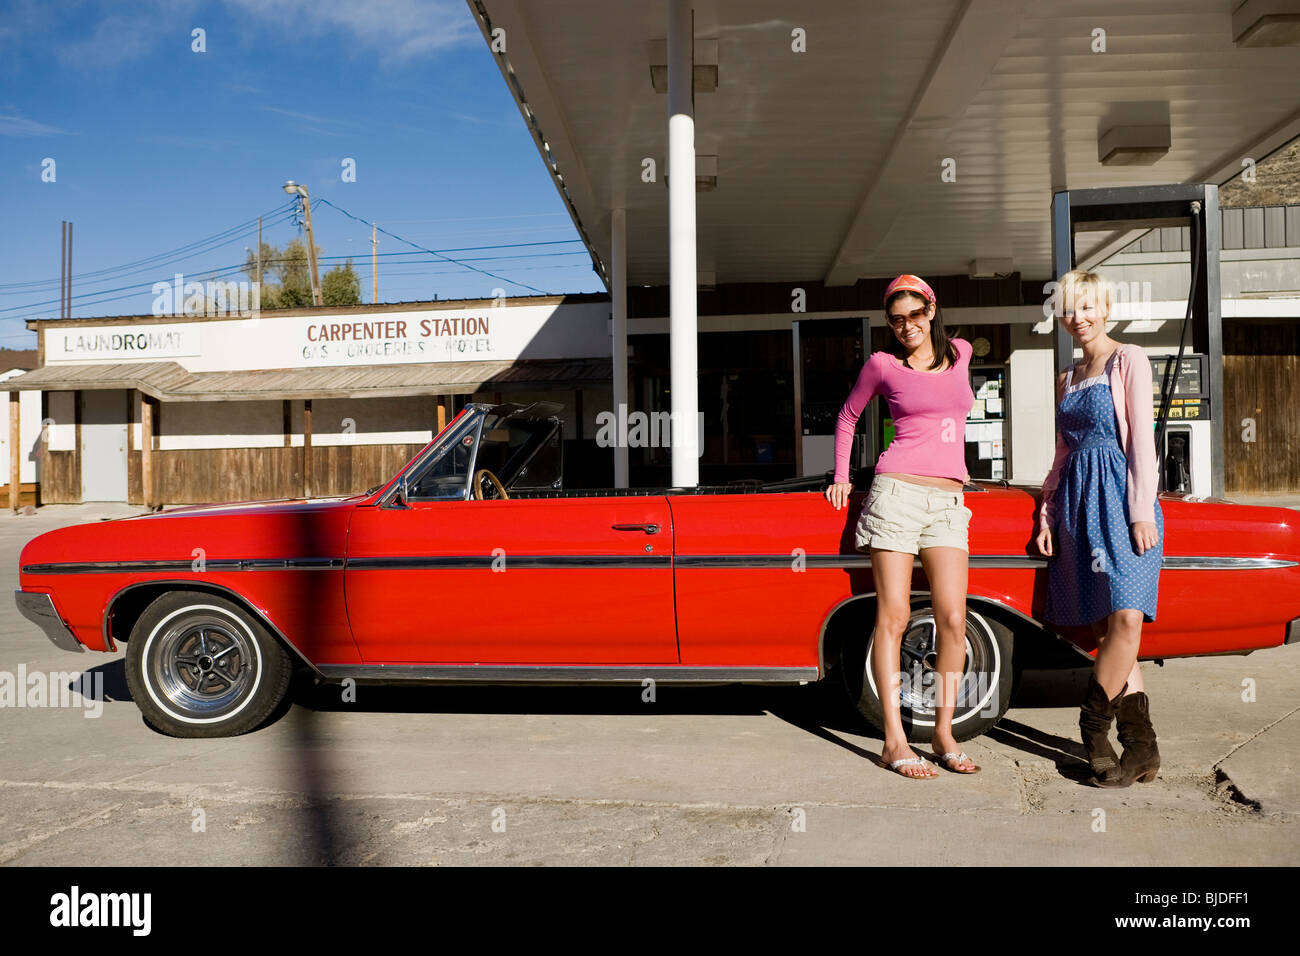 two women at a gas station. Stock Photo